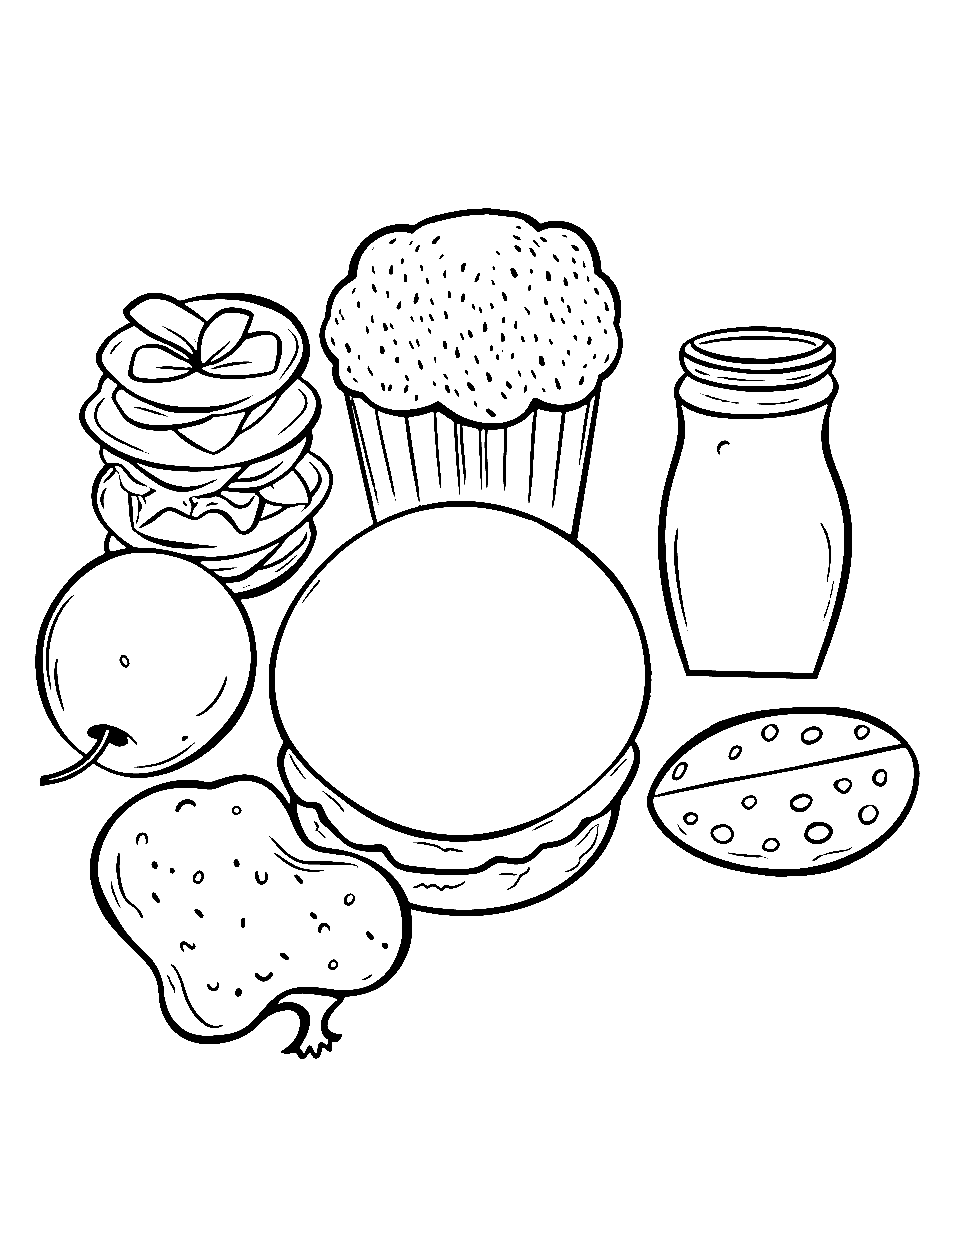 Drawing Doodles Meal Food Coloring Page - Hand-drawn doodles of a complete meal, from drink to dessert.